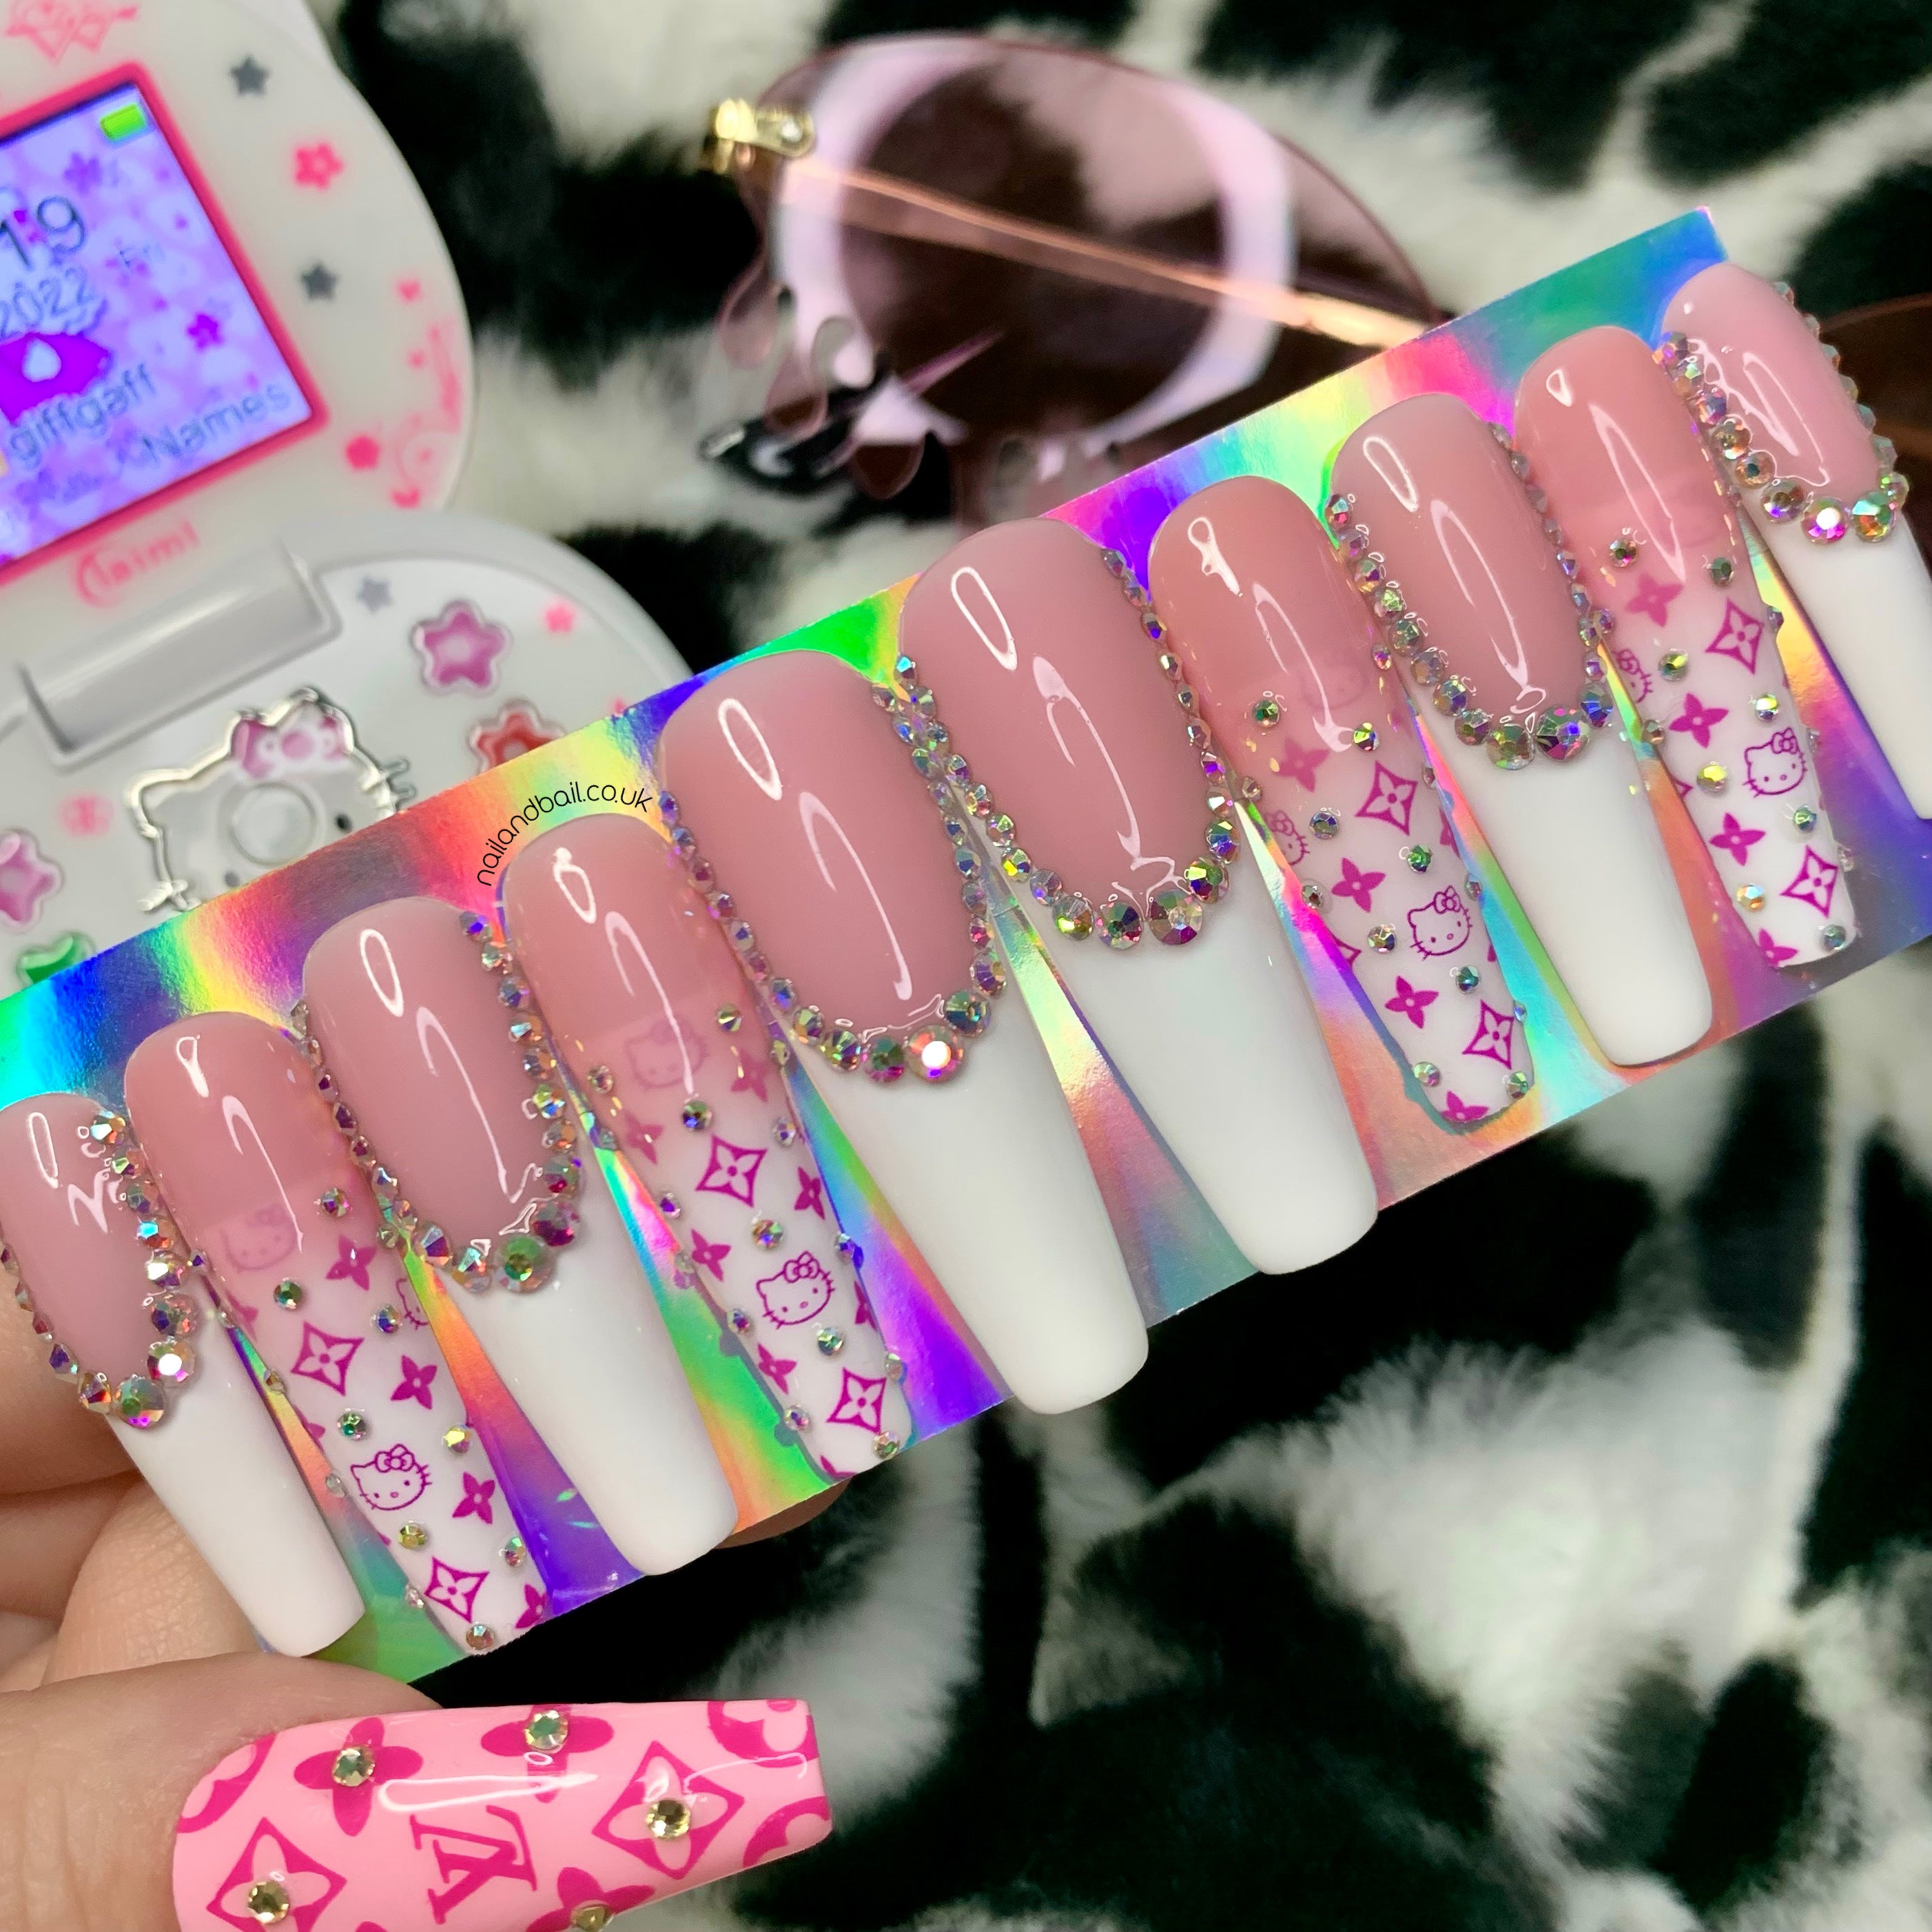 30 Gangster Instagram Baddie Nails To Obsess Over in 2023